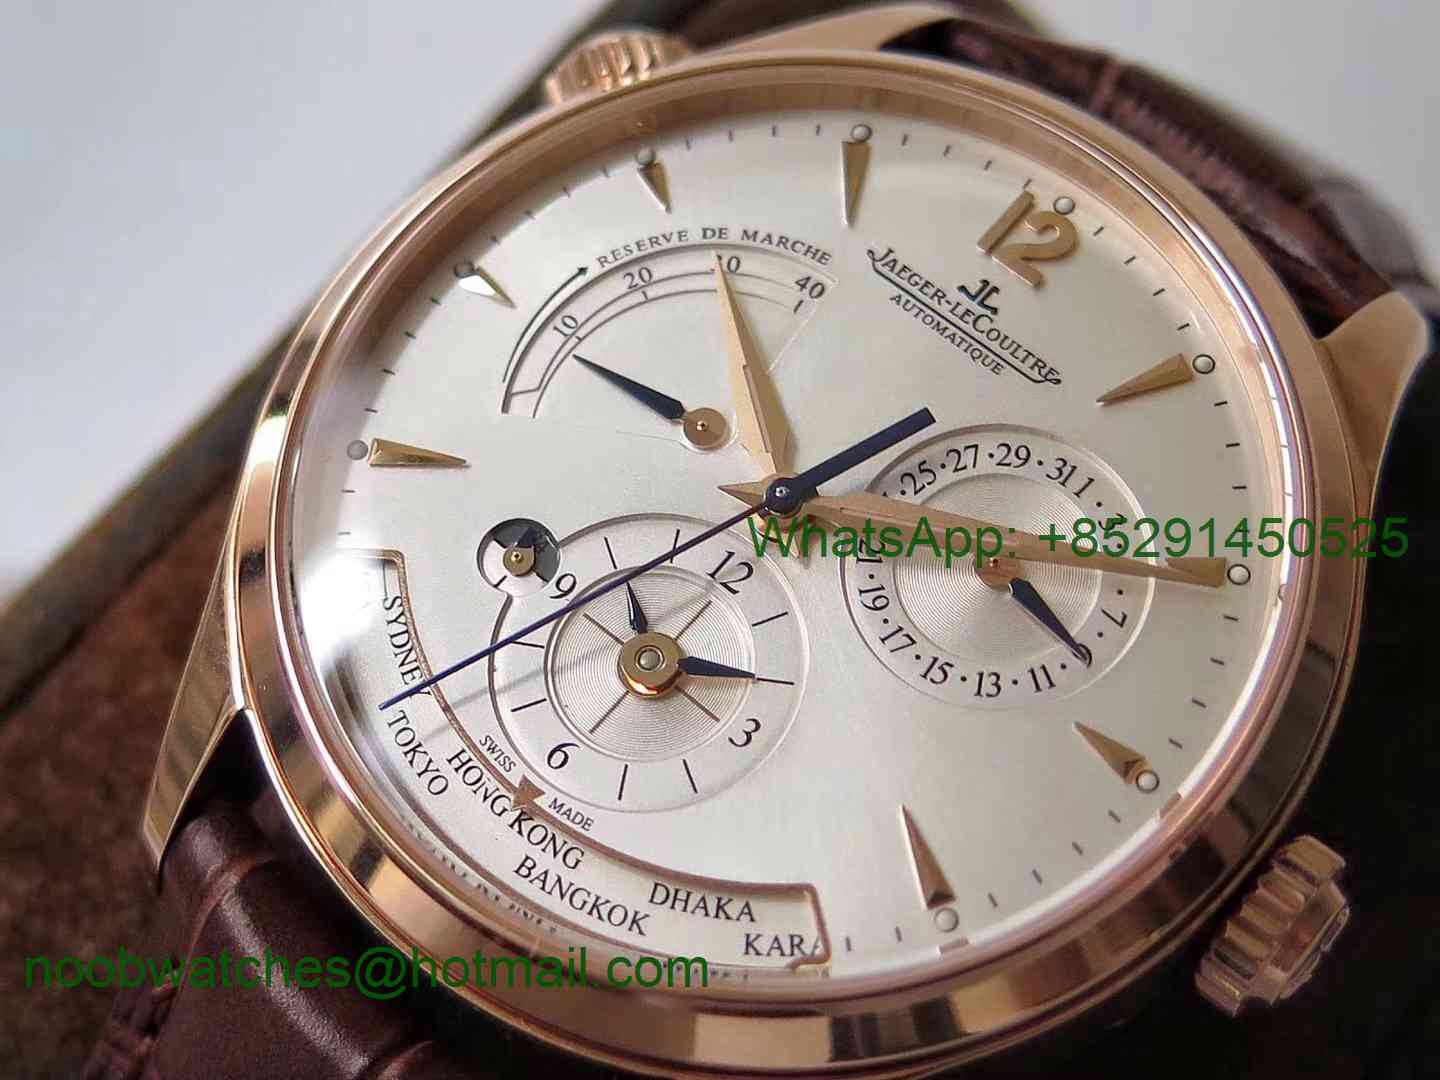 Replica Jaeger Lecoultre JLC Master Geographic Real Power Reserve Rose Gold ZF 1:1 Best Edition Silver Dial A939